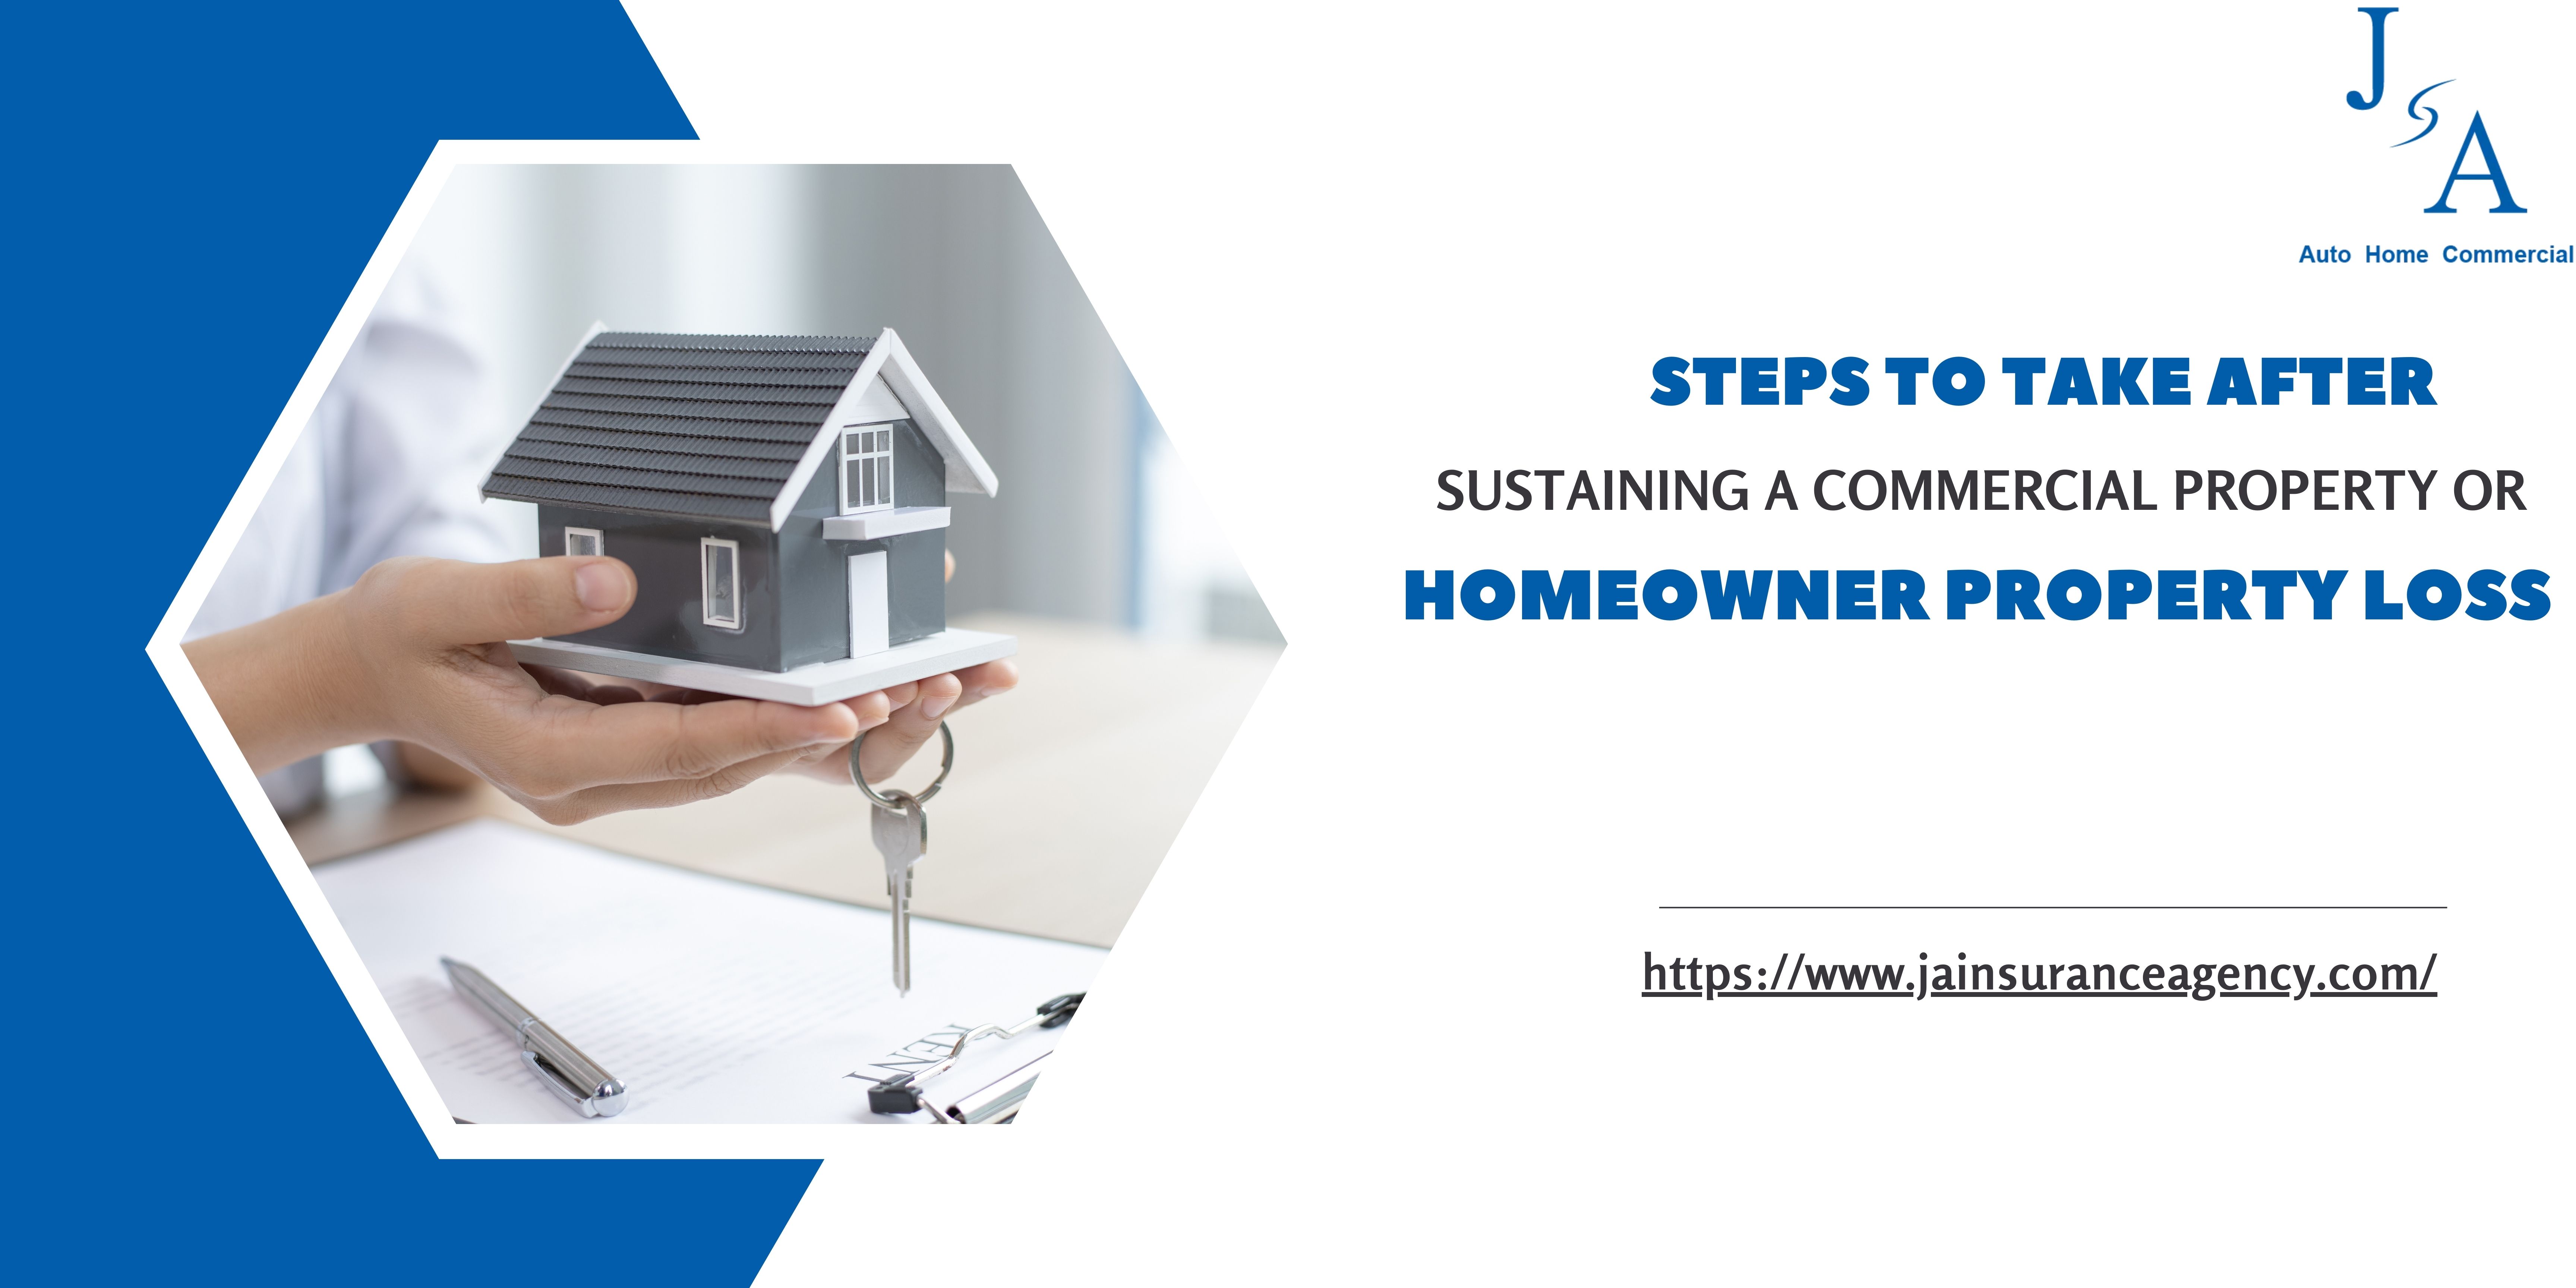 Steps to Take After Sustaining a Commercial Property or Homeowner Property Loss